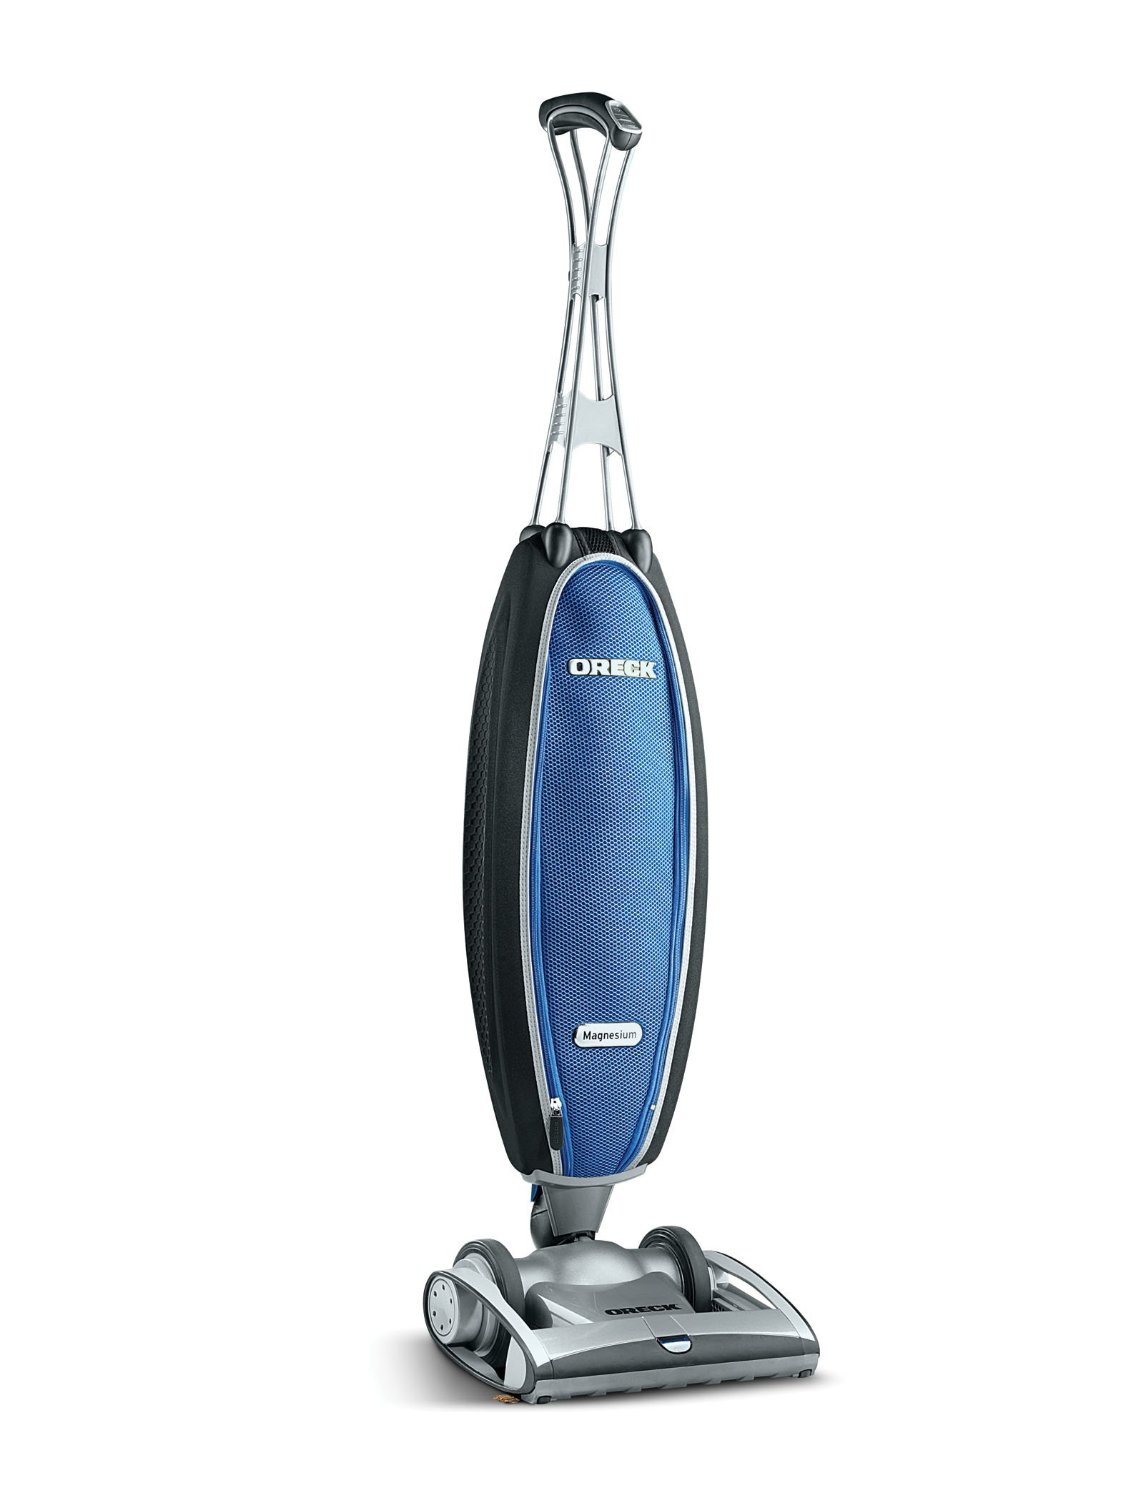 Compare upright vacuum cleaners